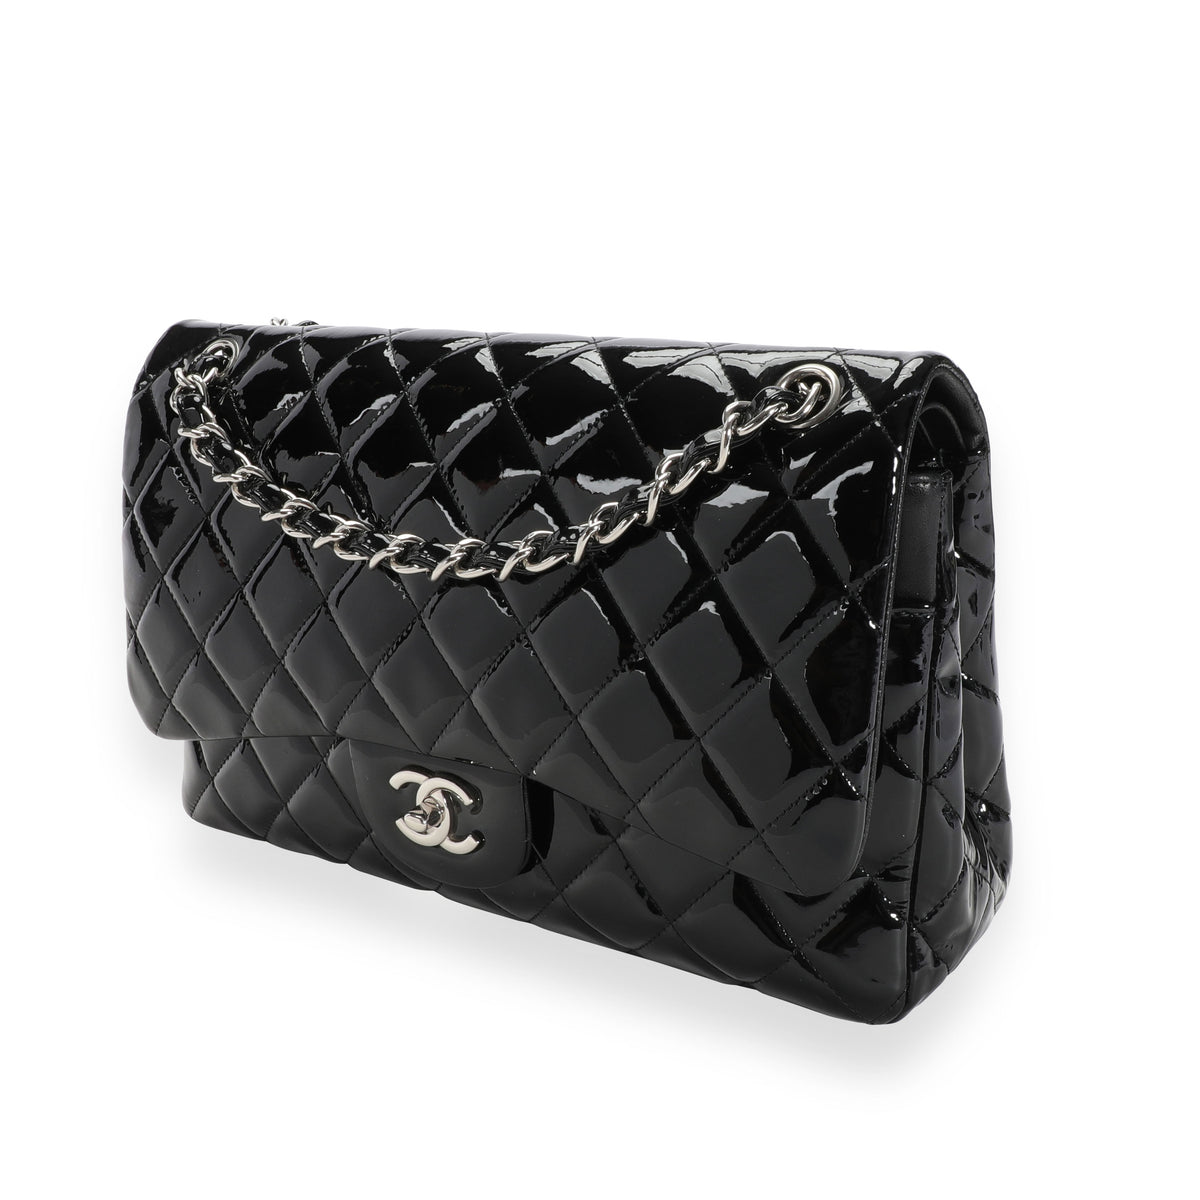 Chanel Black Quilted Patent Leather Jumbo Classic Double Flap Bag